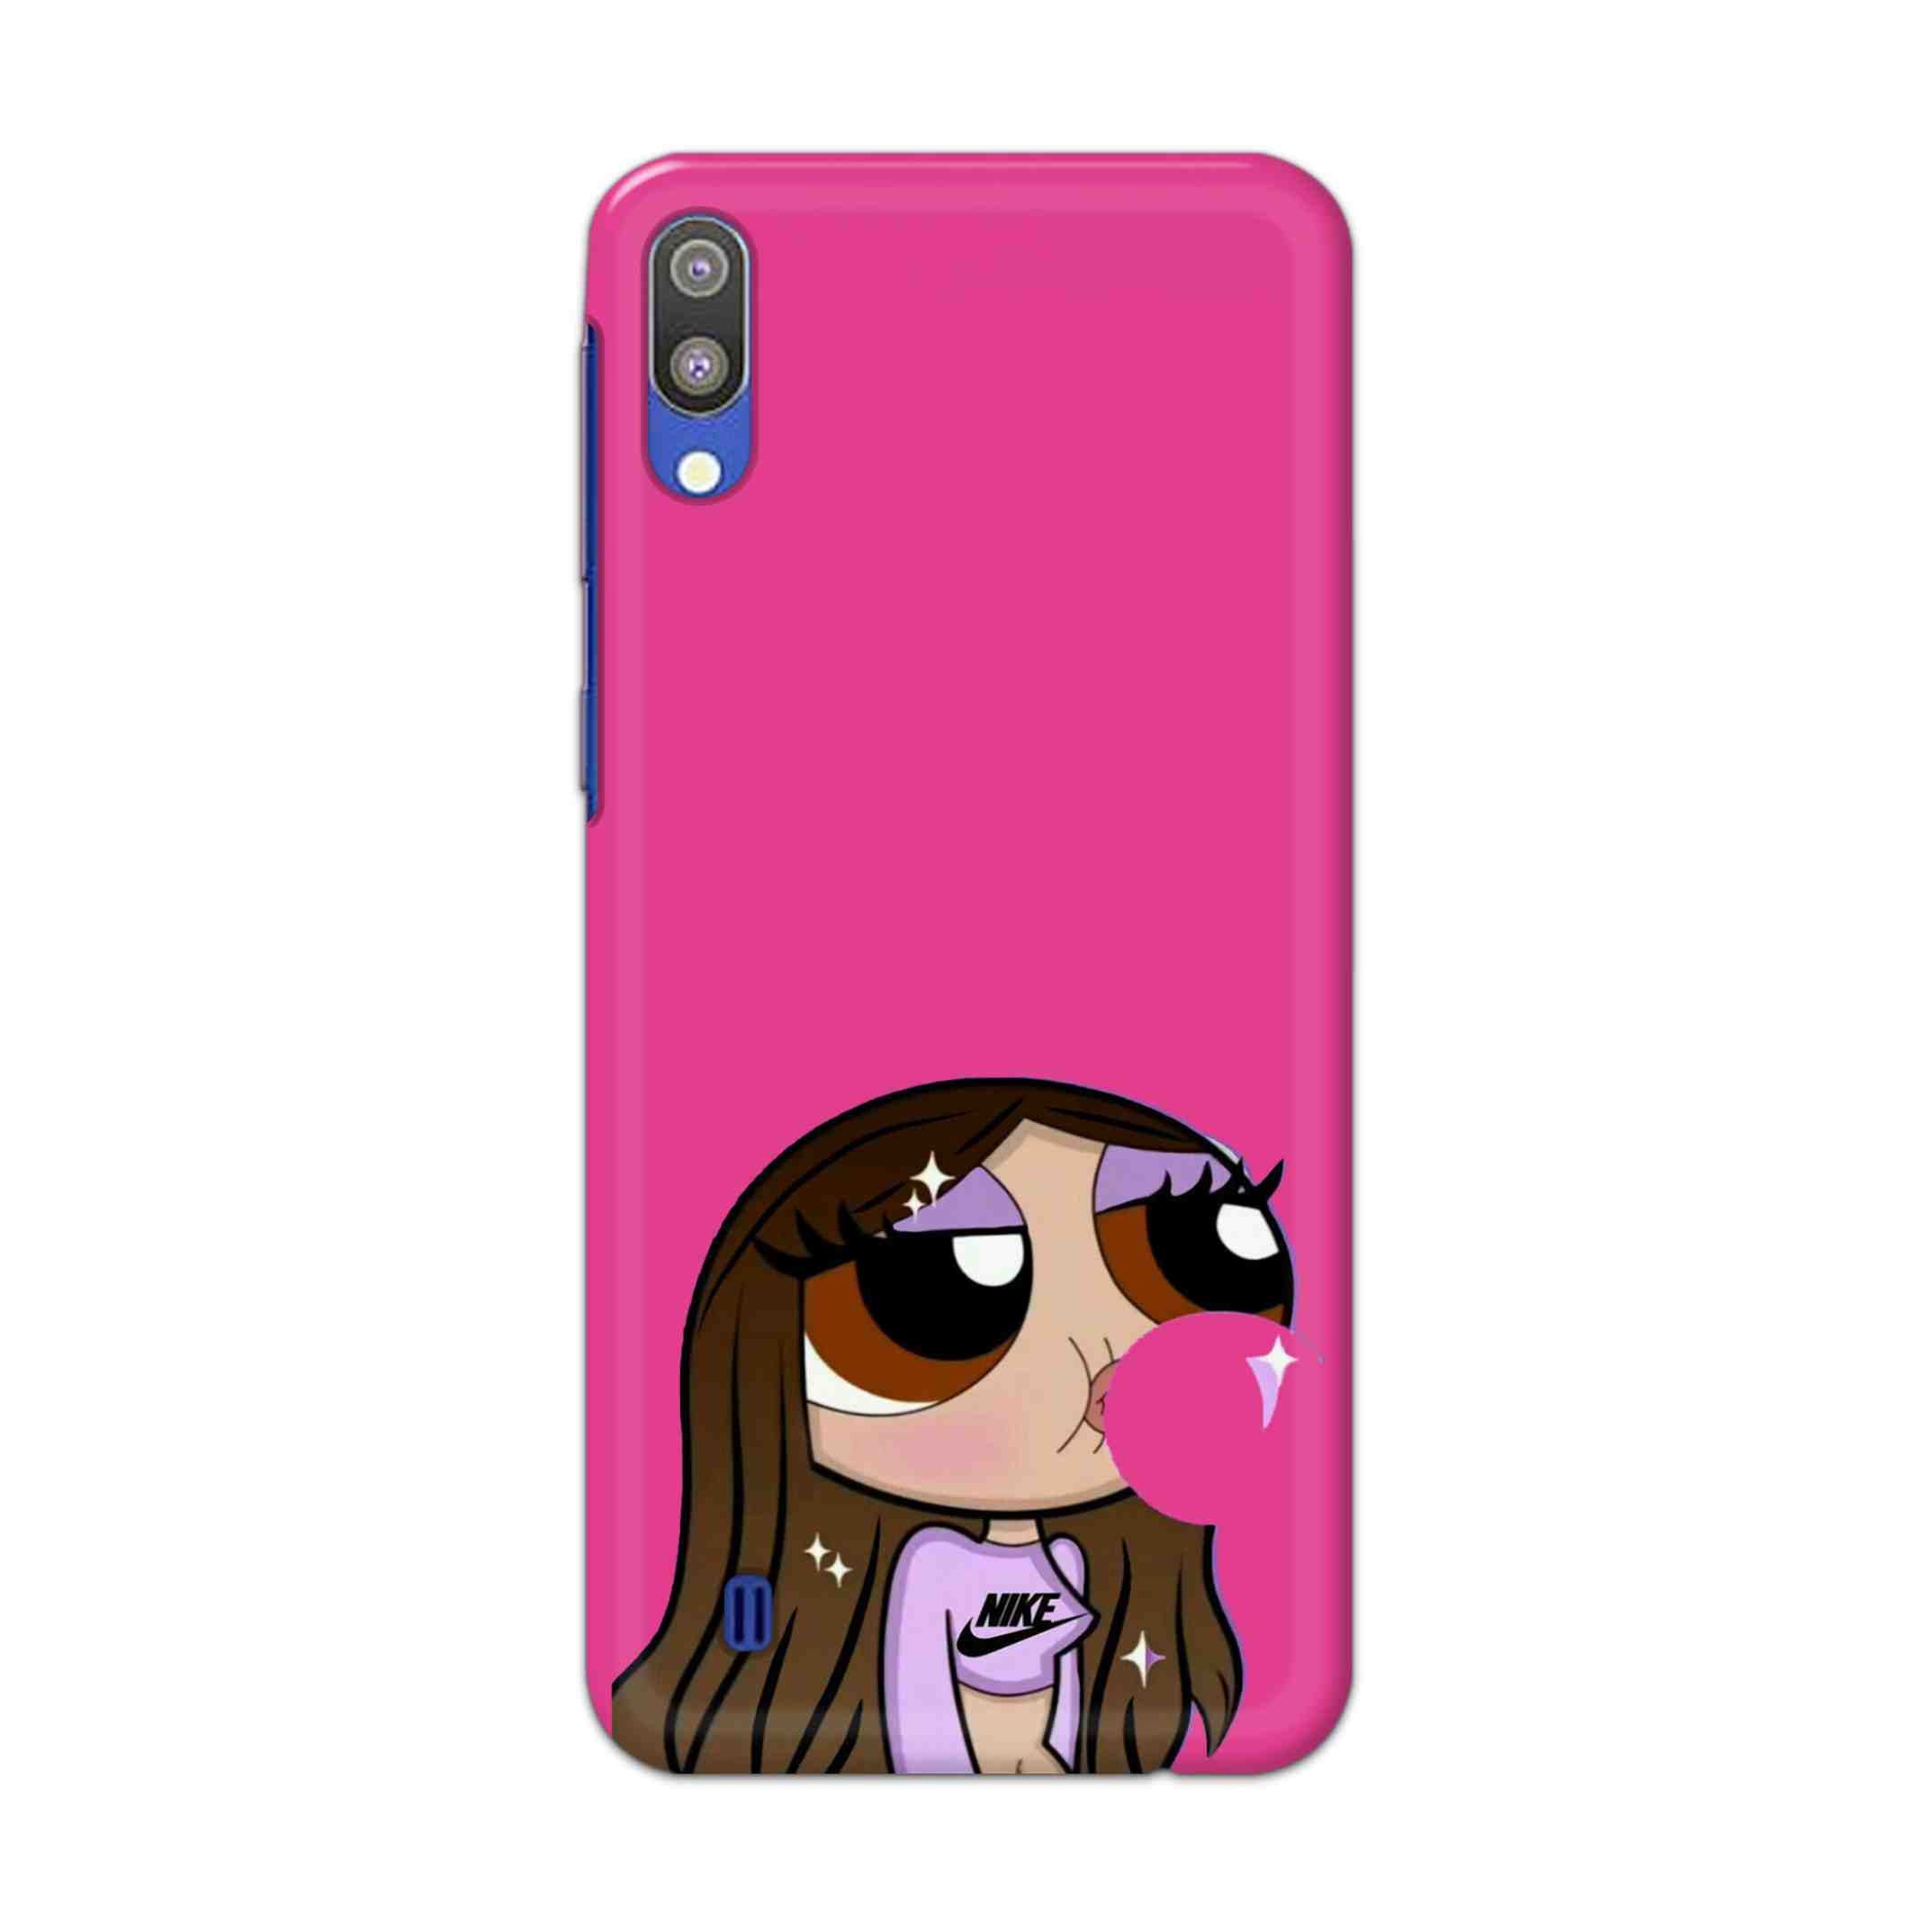 Buy Bubble Girl Hard Back Mobile Phone Case Cover For Samsung Galaxy M10 Online